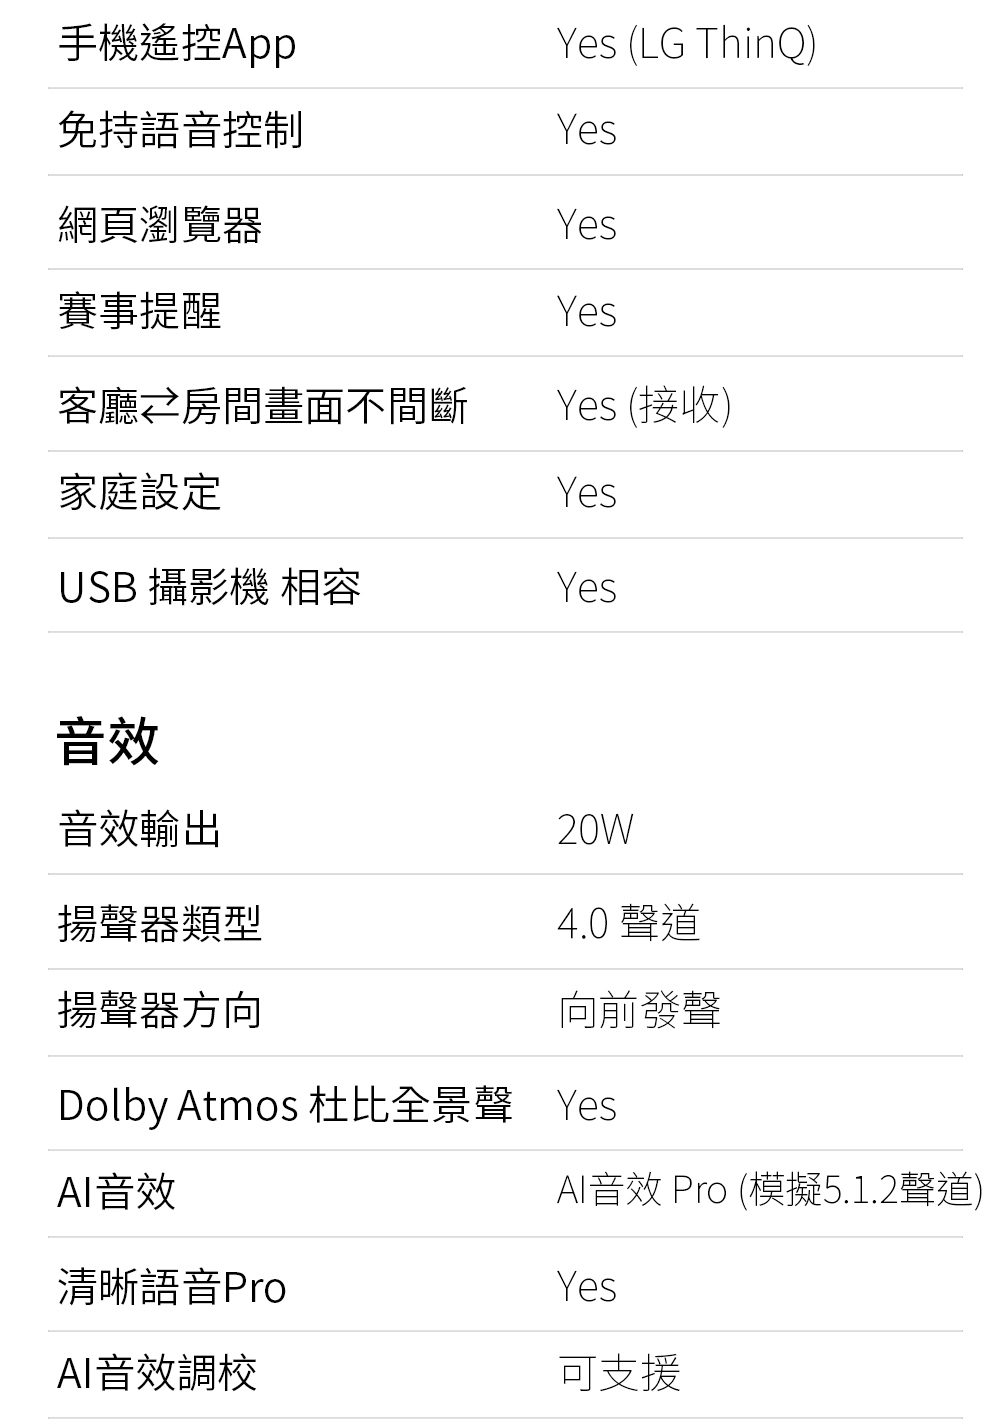 Dolby Atmos 杜比全景聲 Yes